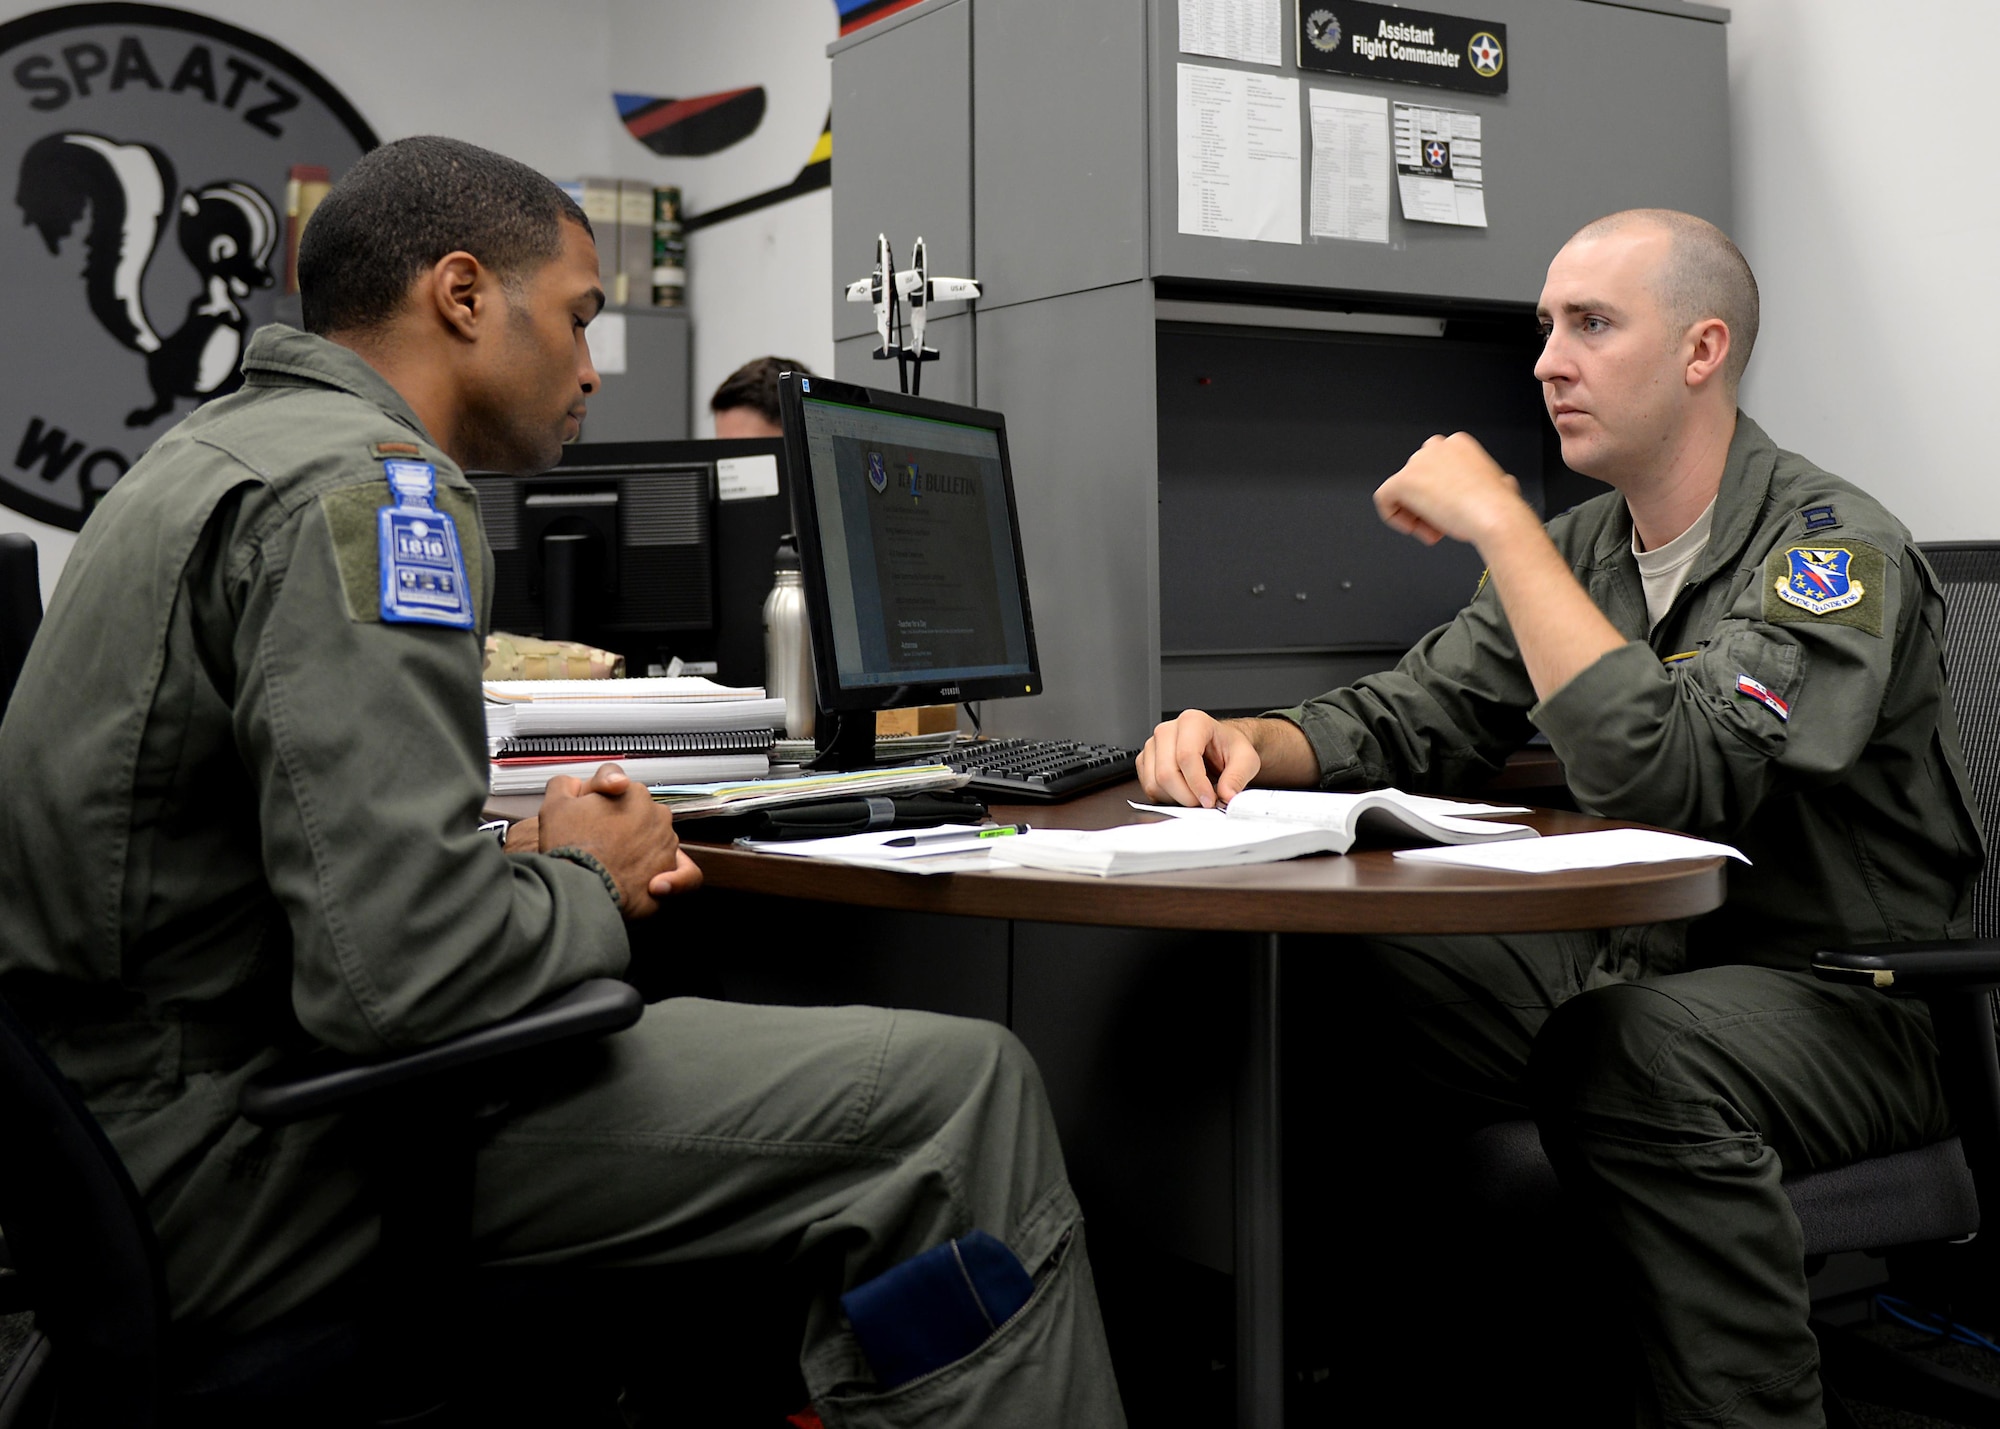 Second Lt. Marcos Marrero-Disla, a 41st Flying Training Wing student pilot, and Capt. Calogero San Filippo, the 41st FTS Assistant Flight Commander, run through a flight plan Aug. 8, 2017, on Columbus Air Force Base, Mississippi. Talking through flight plans and scenarios helps pilots develop solutions and prepare them for creating real flight plans. (U.S. Air Force photo by Airman 1st Class Keith Holcomb)